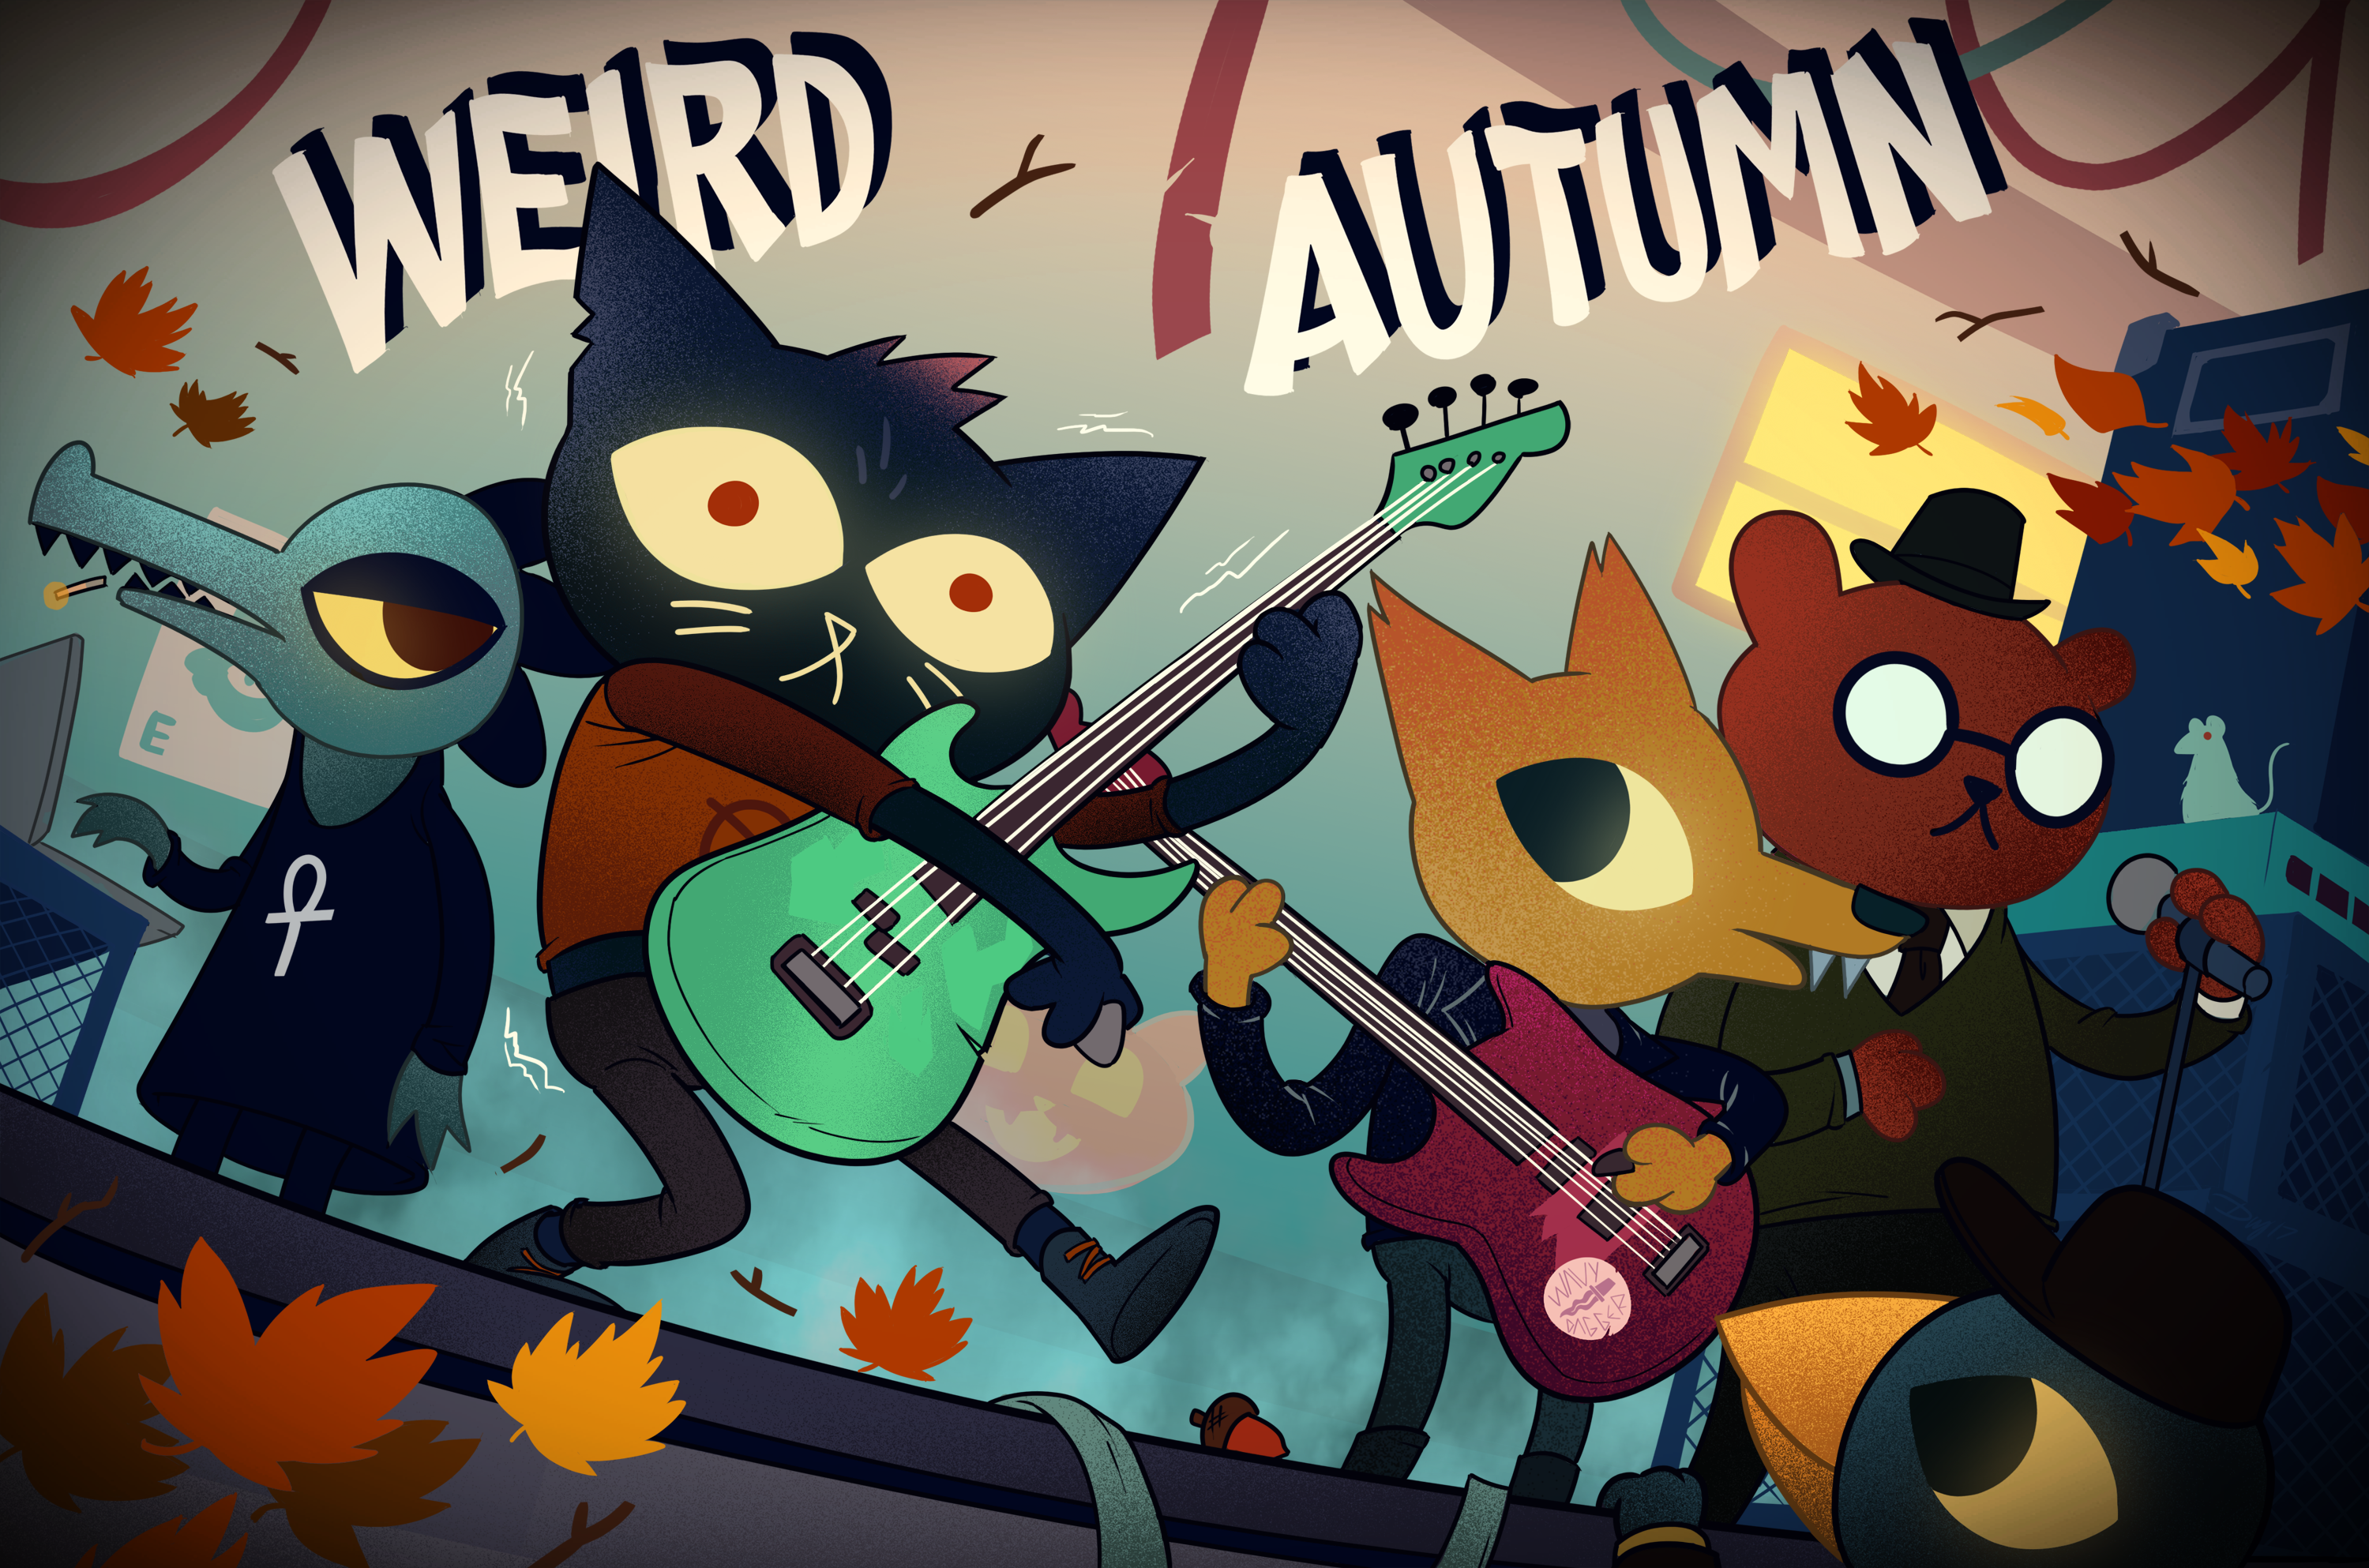 weird_autumn_by_angusburgers-db0z0dq.png